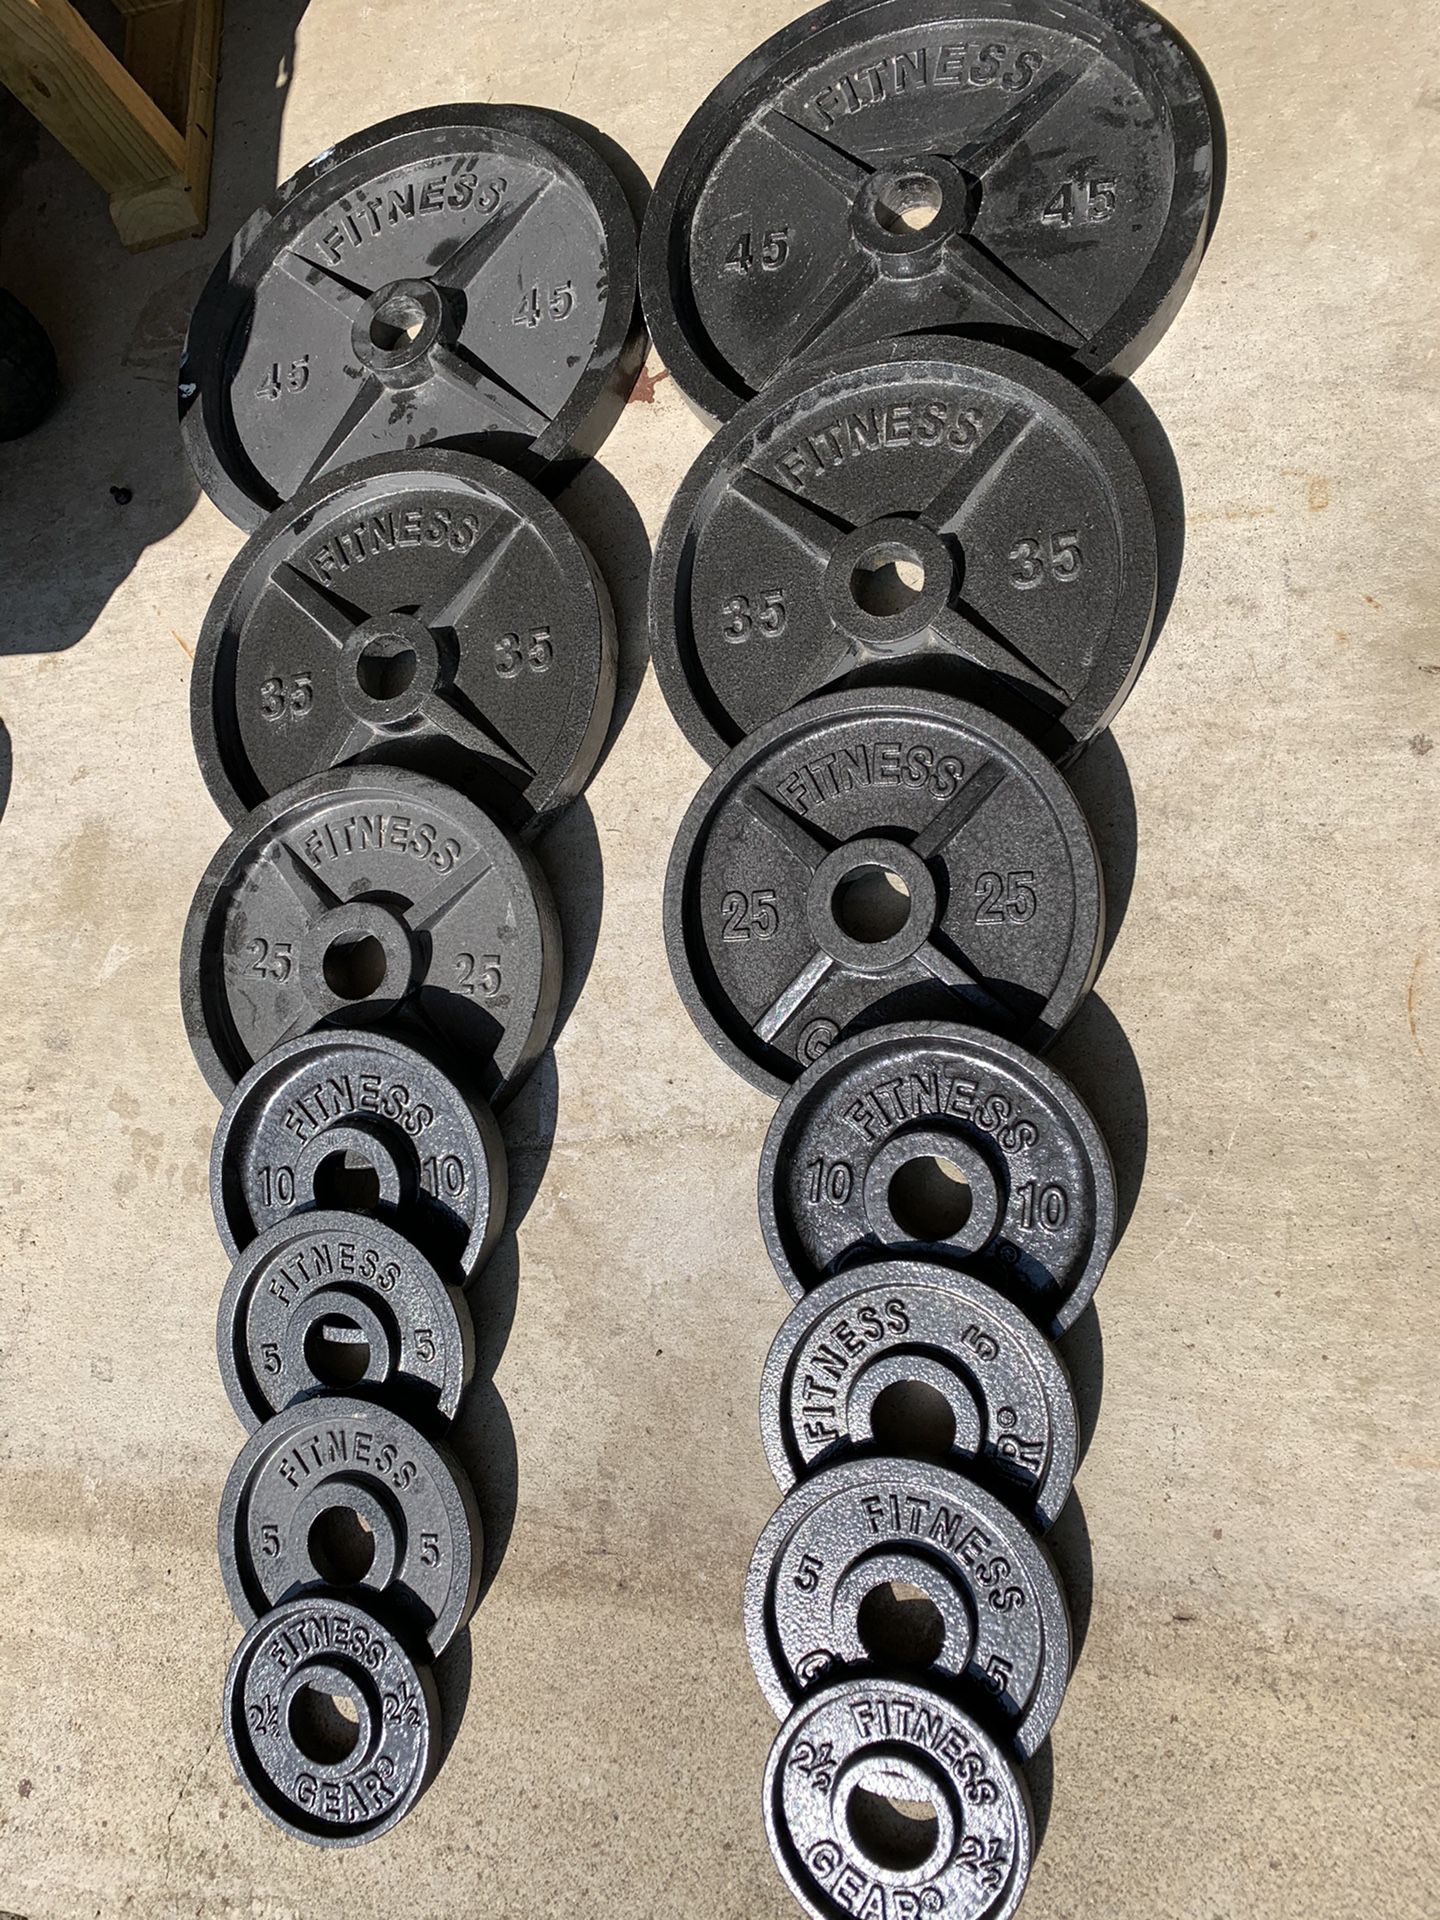 255 Pounds of Olympic Weight Plates